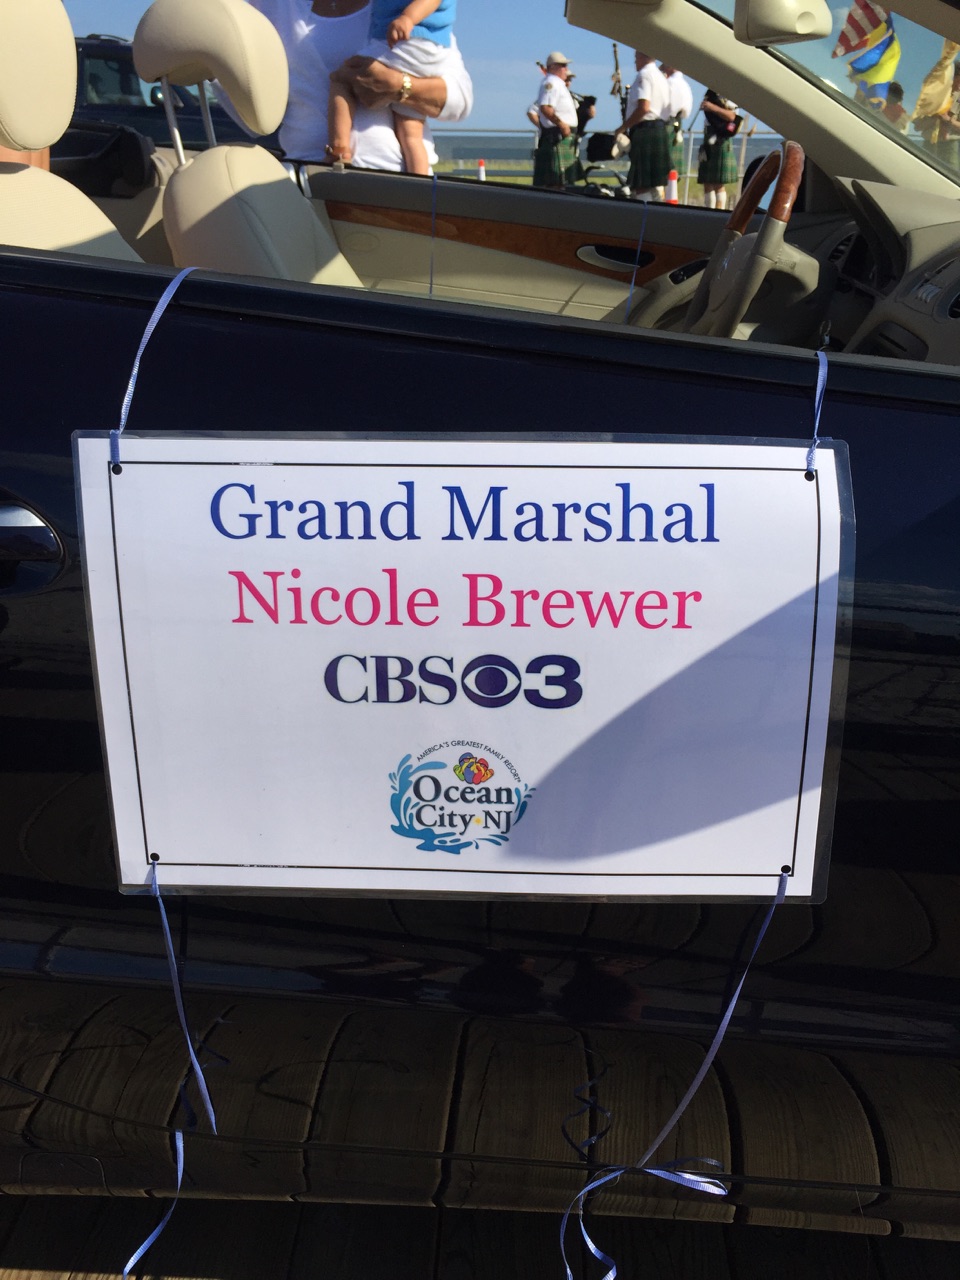 Nicole Brewer serves as Grand Marshall at the Ocean City, NJ baby parade!